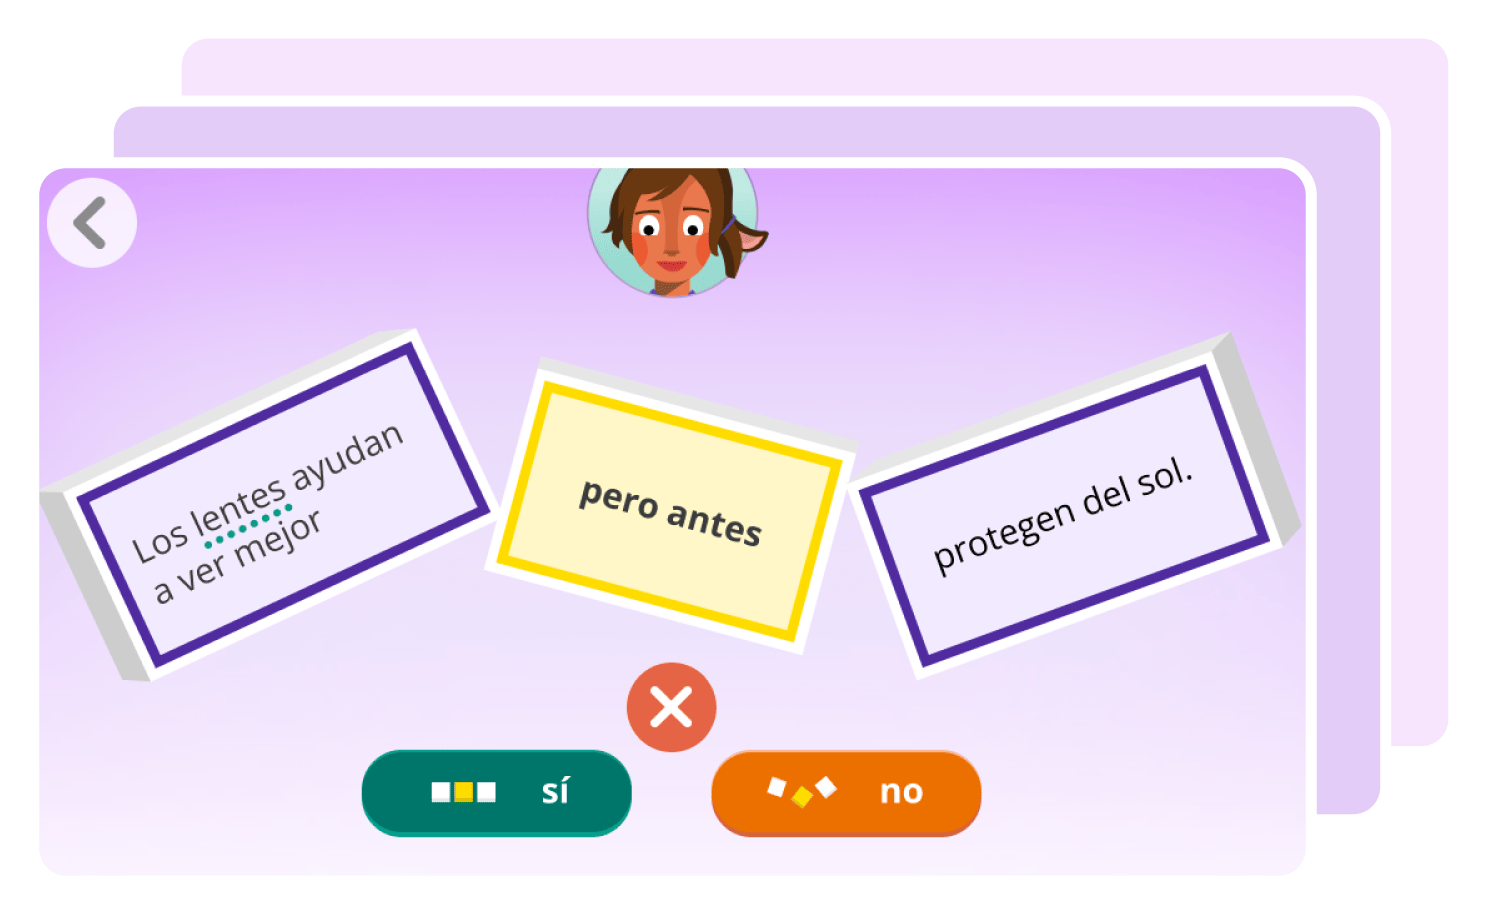 Digital flashcards in Spanish displayed on a purple background, featuring text about glasses, a cartoon character, and yes/no buttons as part of Personalized Spanish literacy instruction.